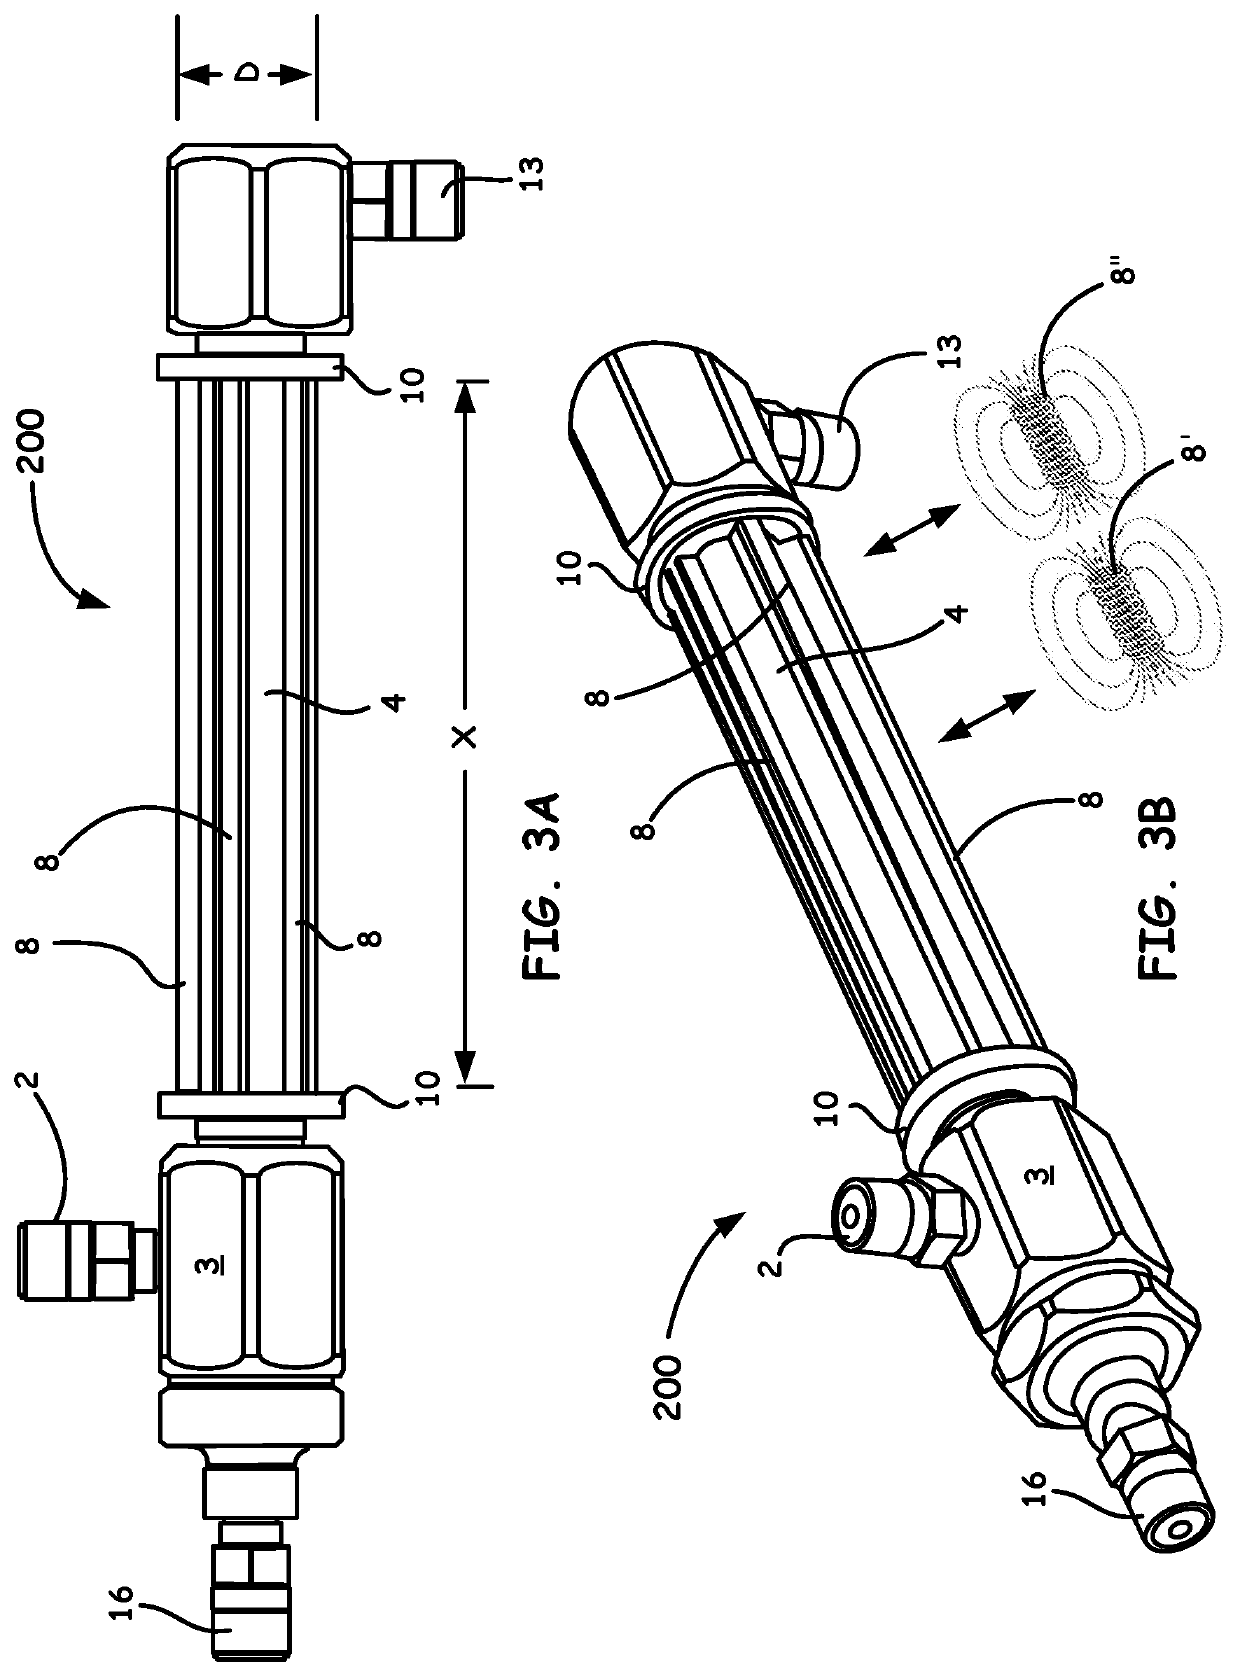 Vortex tube lined with magnets and uses thereof